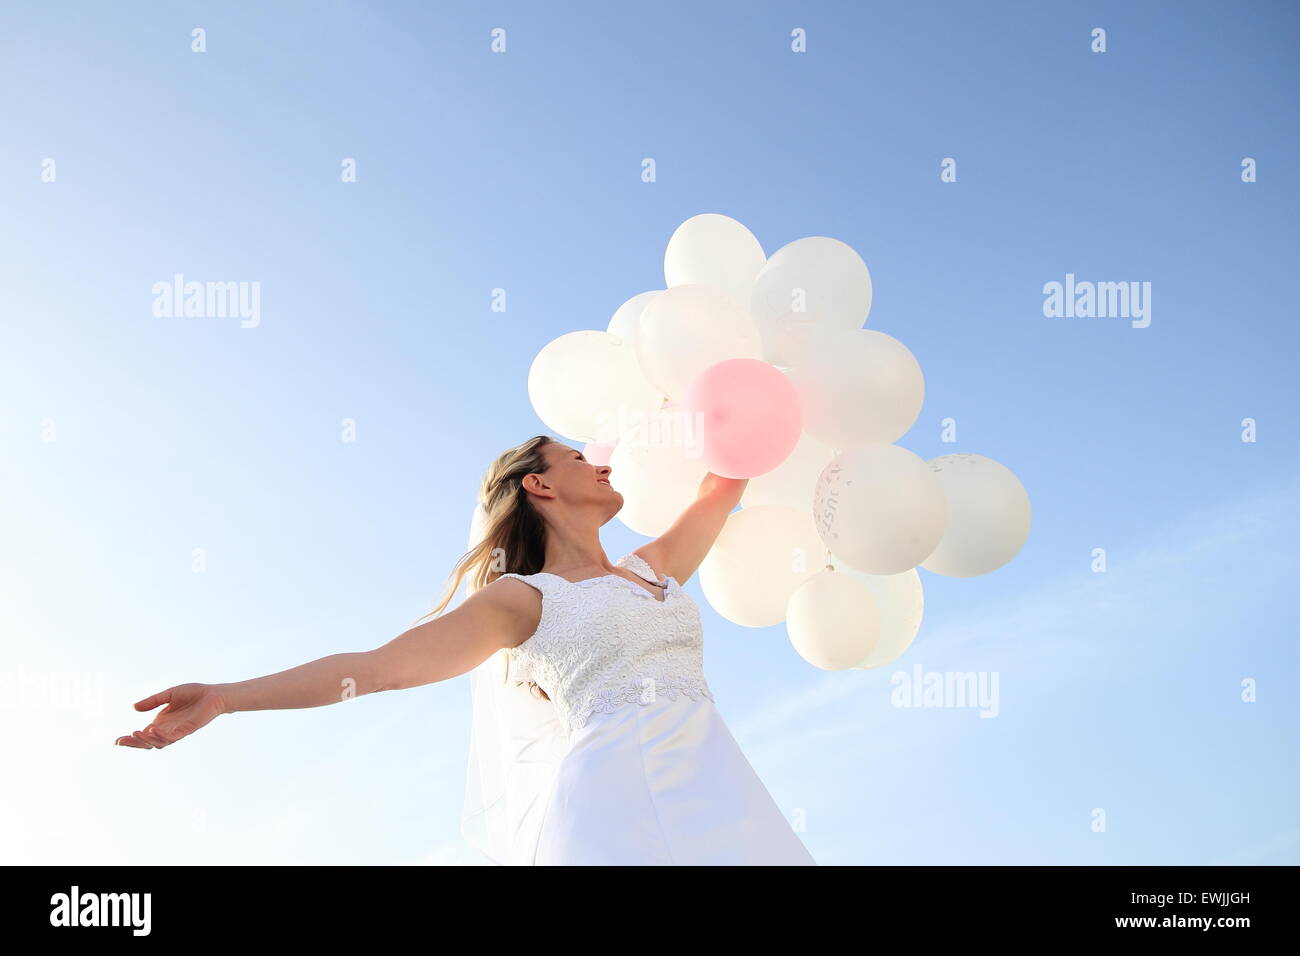 A Happy Bride with white ballons in blue sky Stock Photo